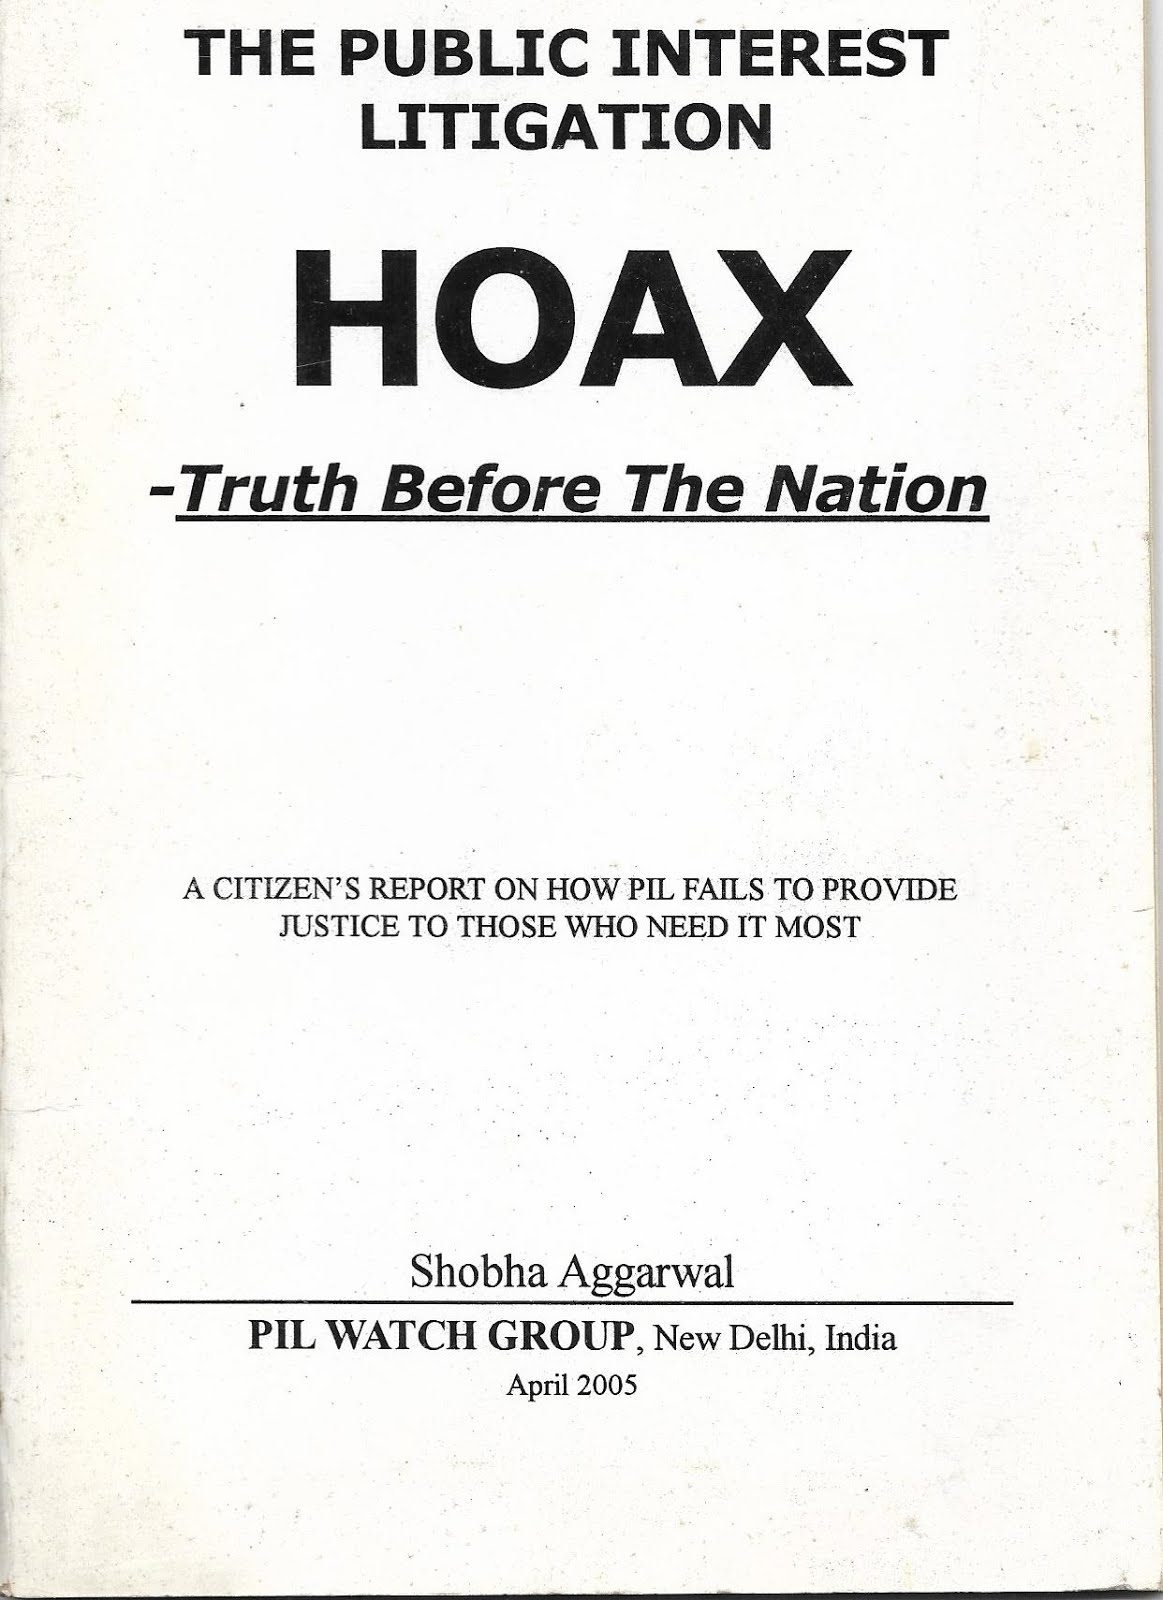 The Public Interest Litigation Hoax - Truth Before The Nation